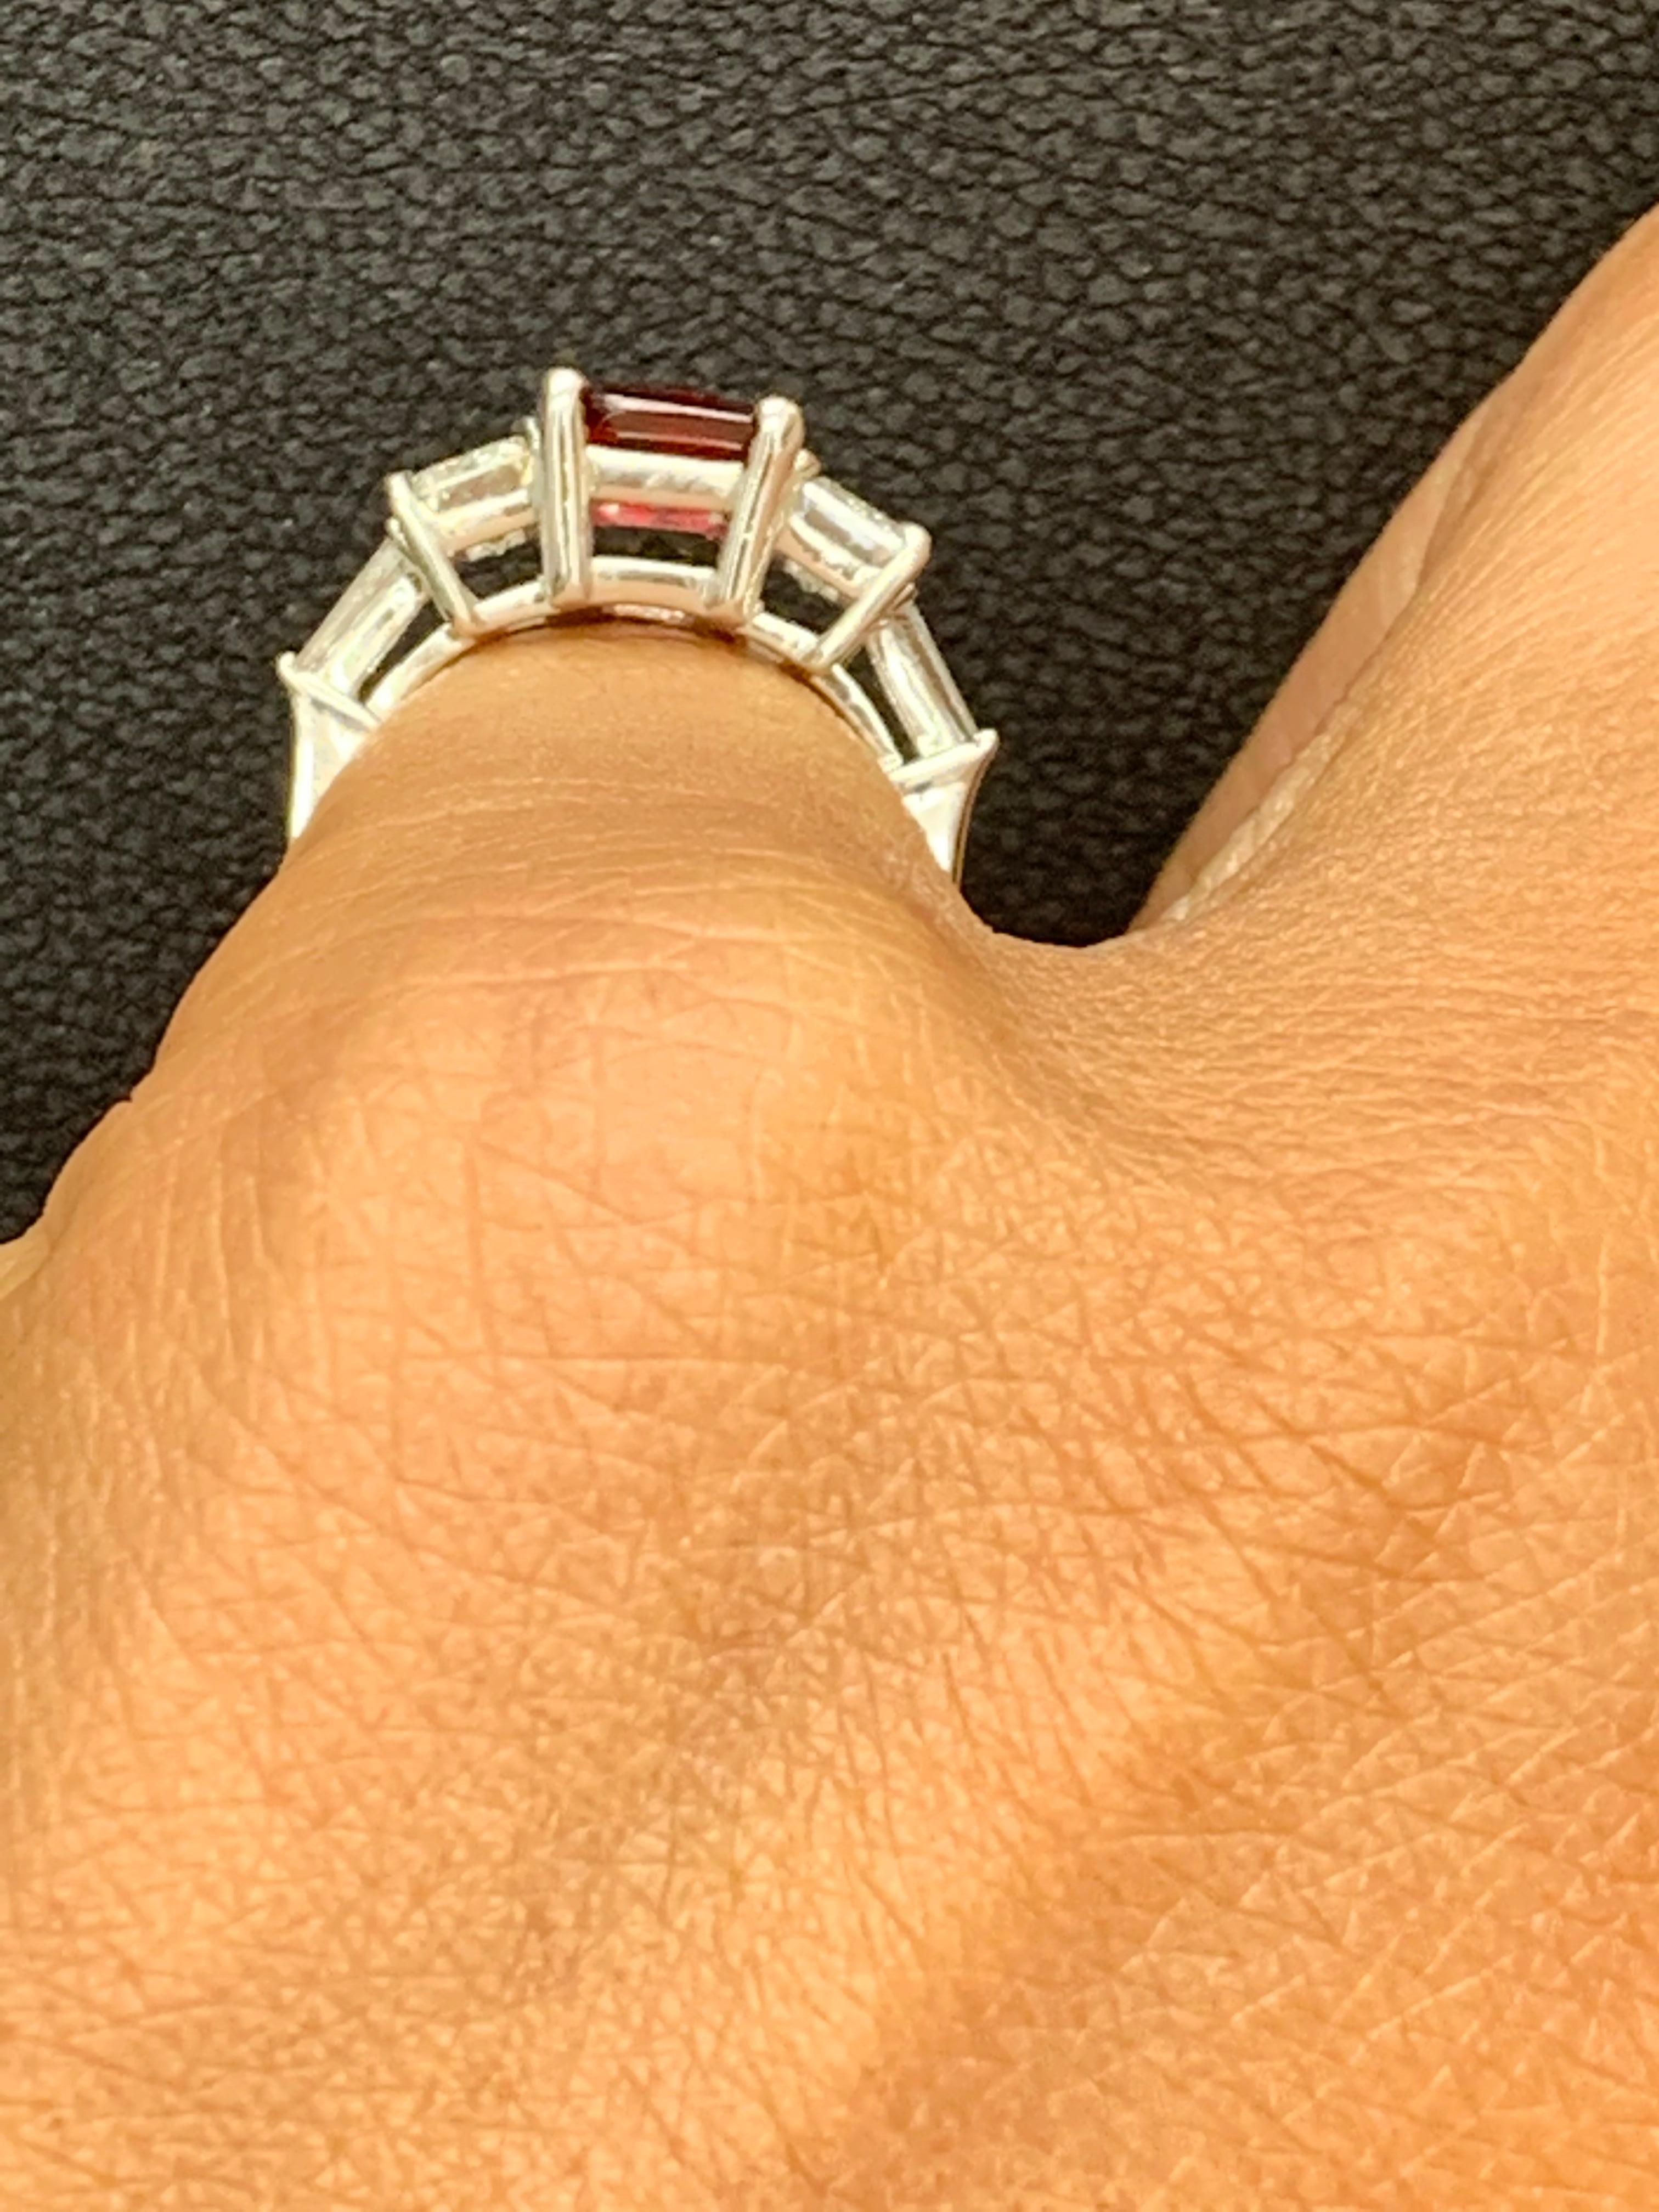 2.04 Carat Emerald Cut Ruby and Diamond Five-Stone Engagement Ring For Sale 3